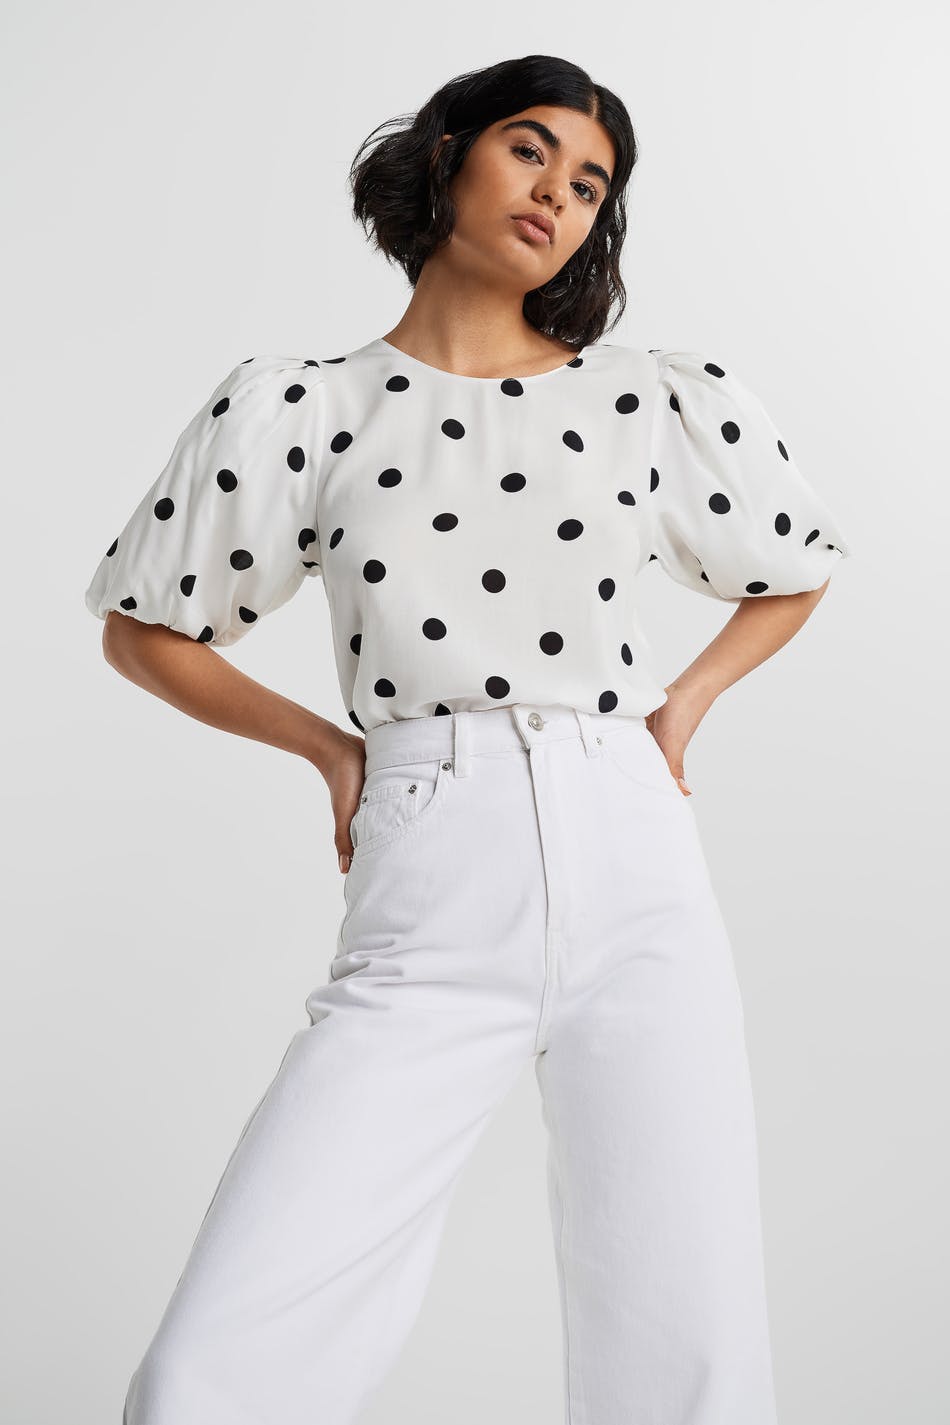 Annie open back blouse, Gina Tricot